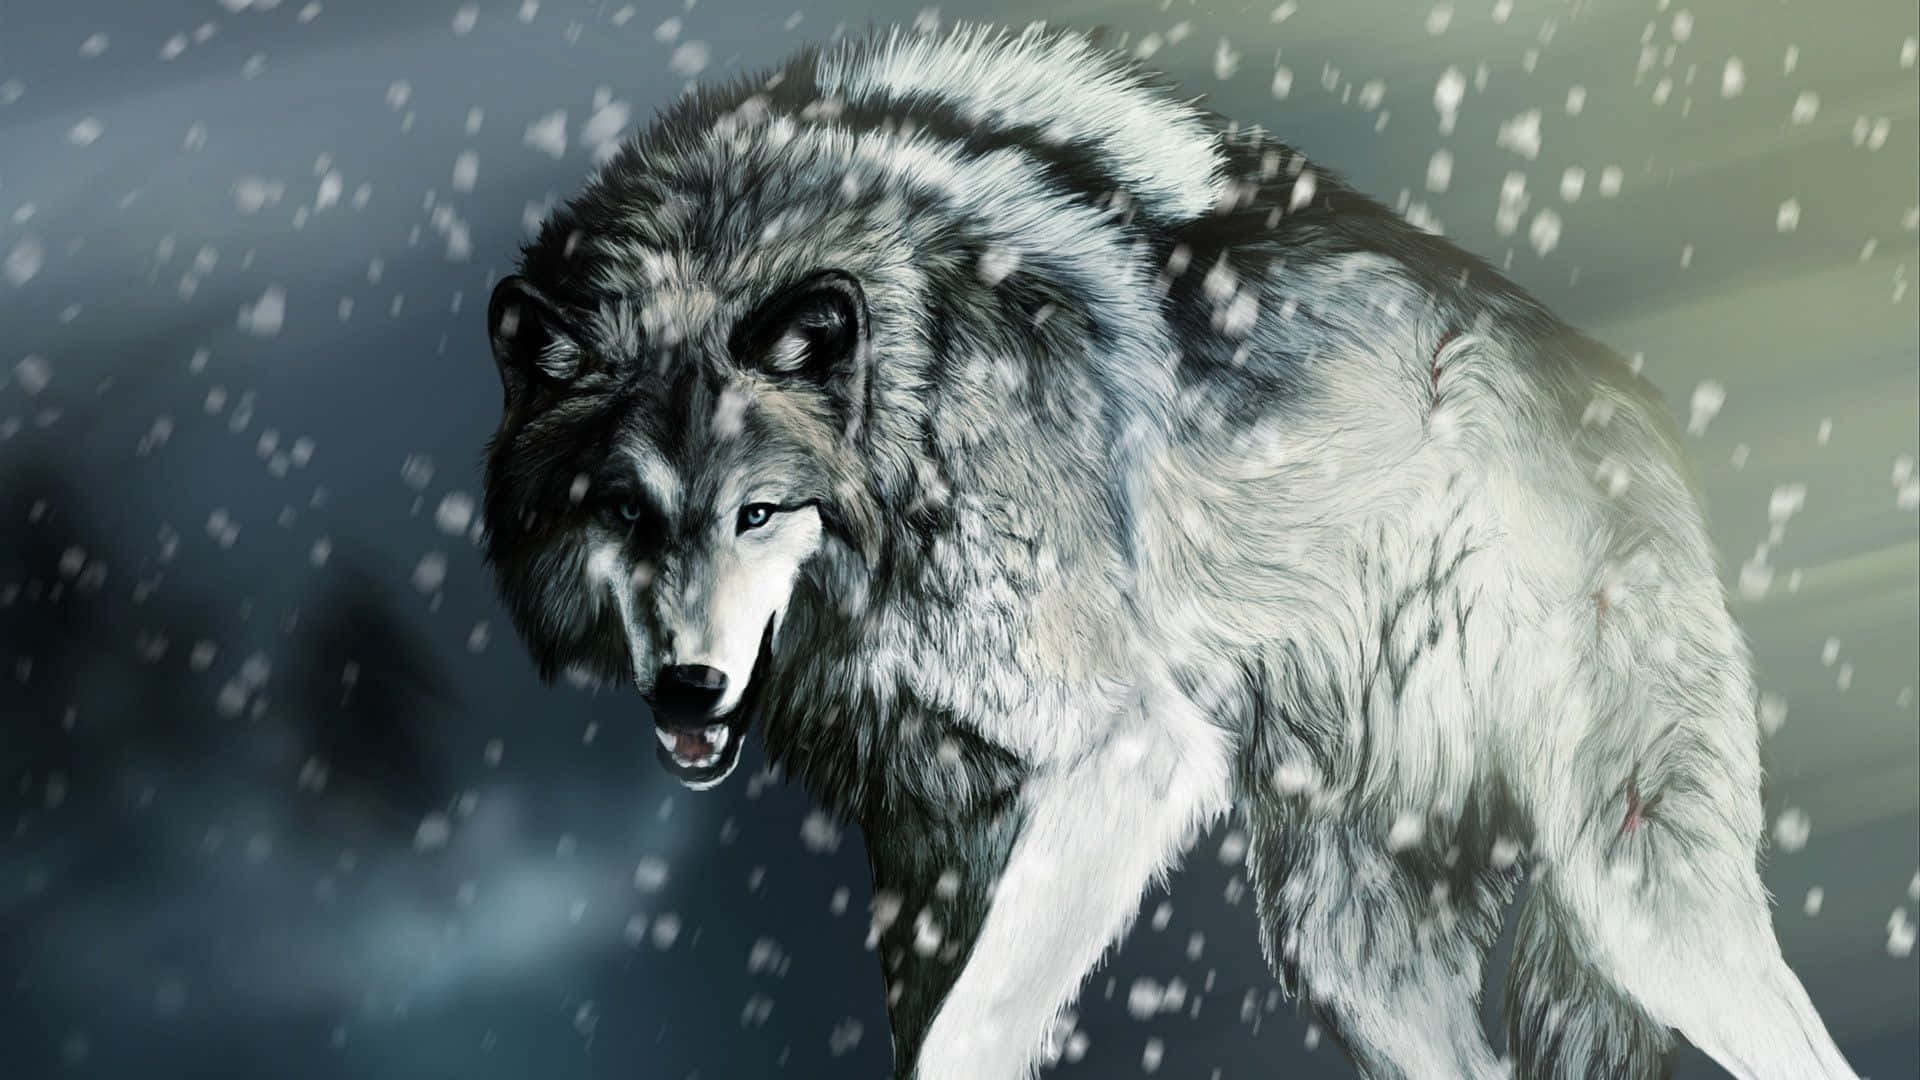 The commanding Alpha Wolf stands at the edge of the forest, staring fiercely across the landscape. Wallpaper